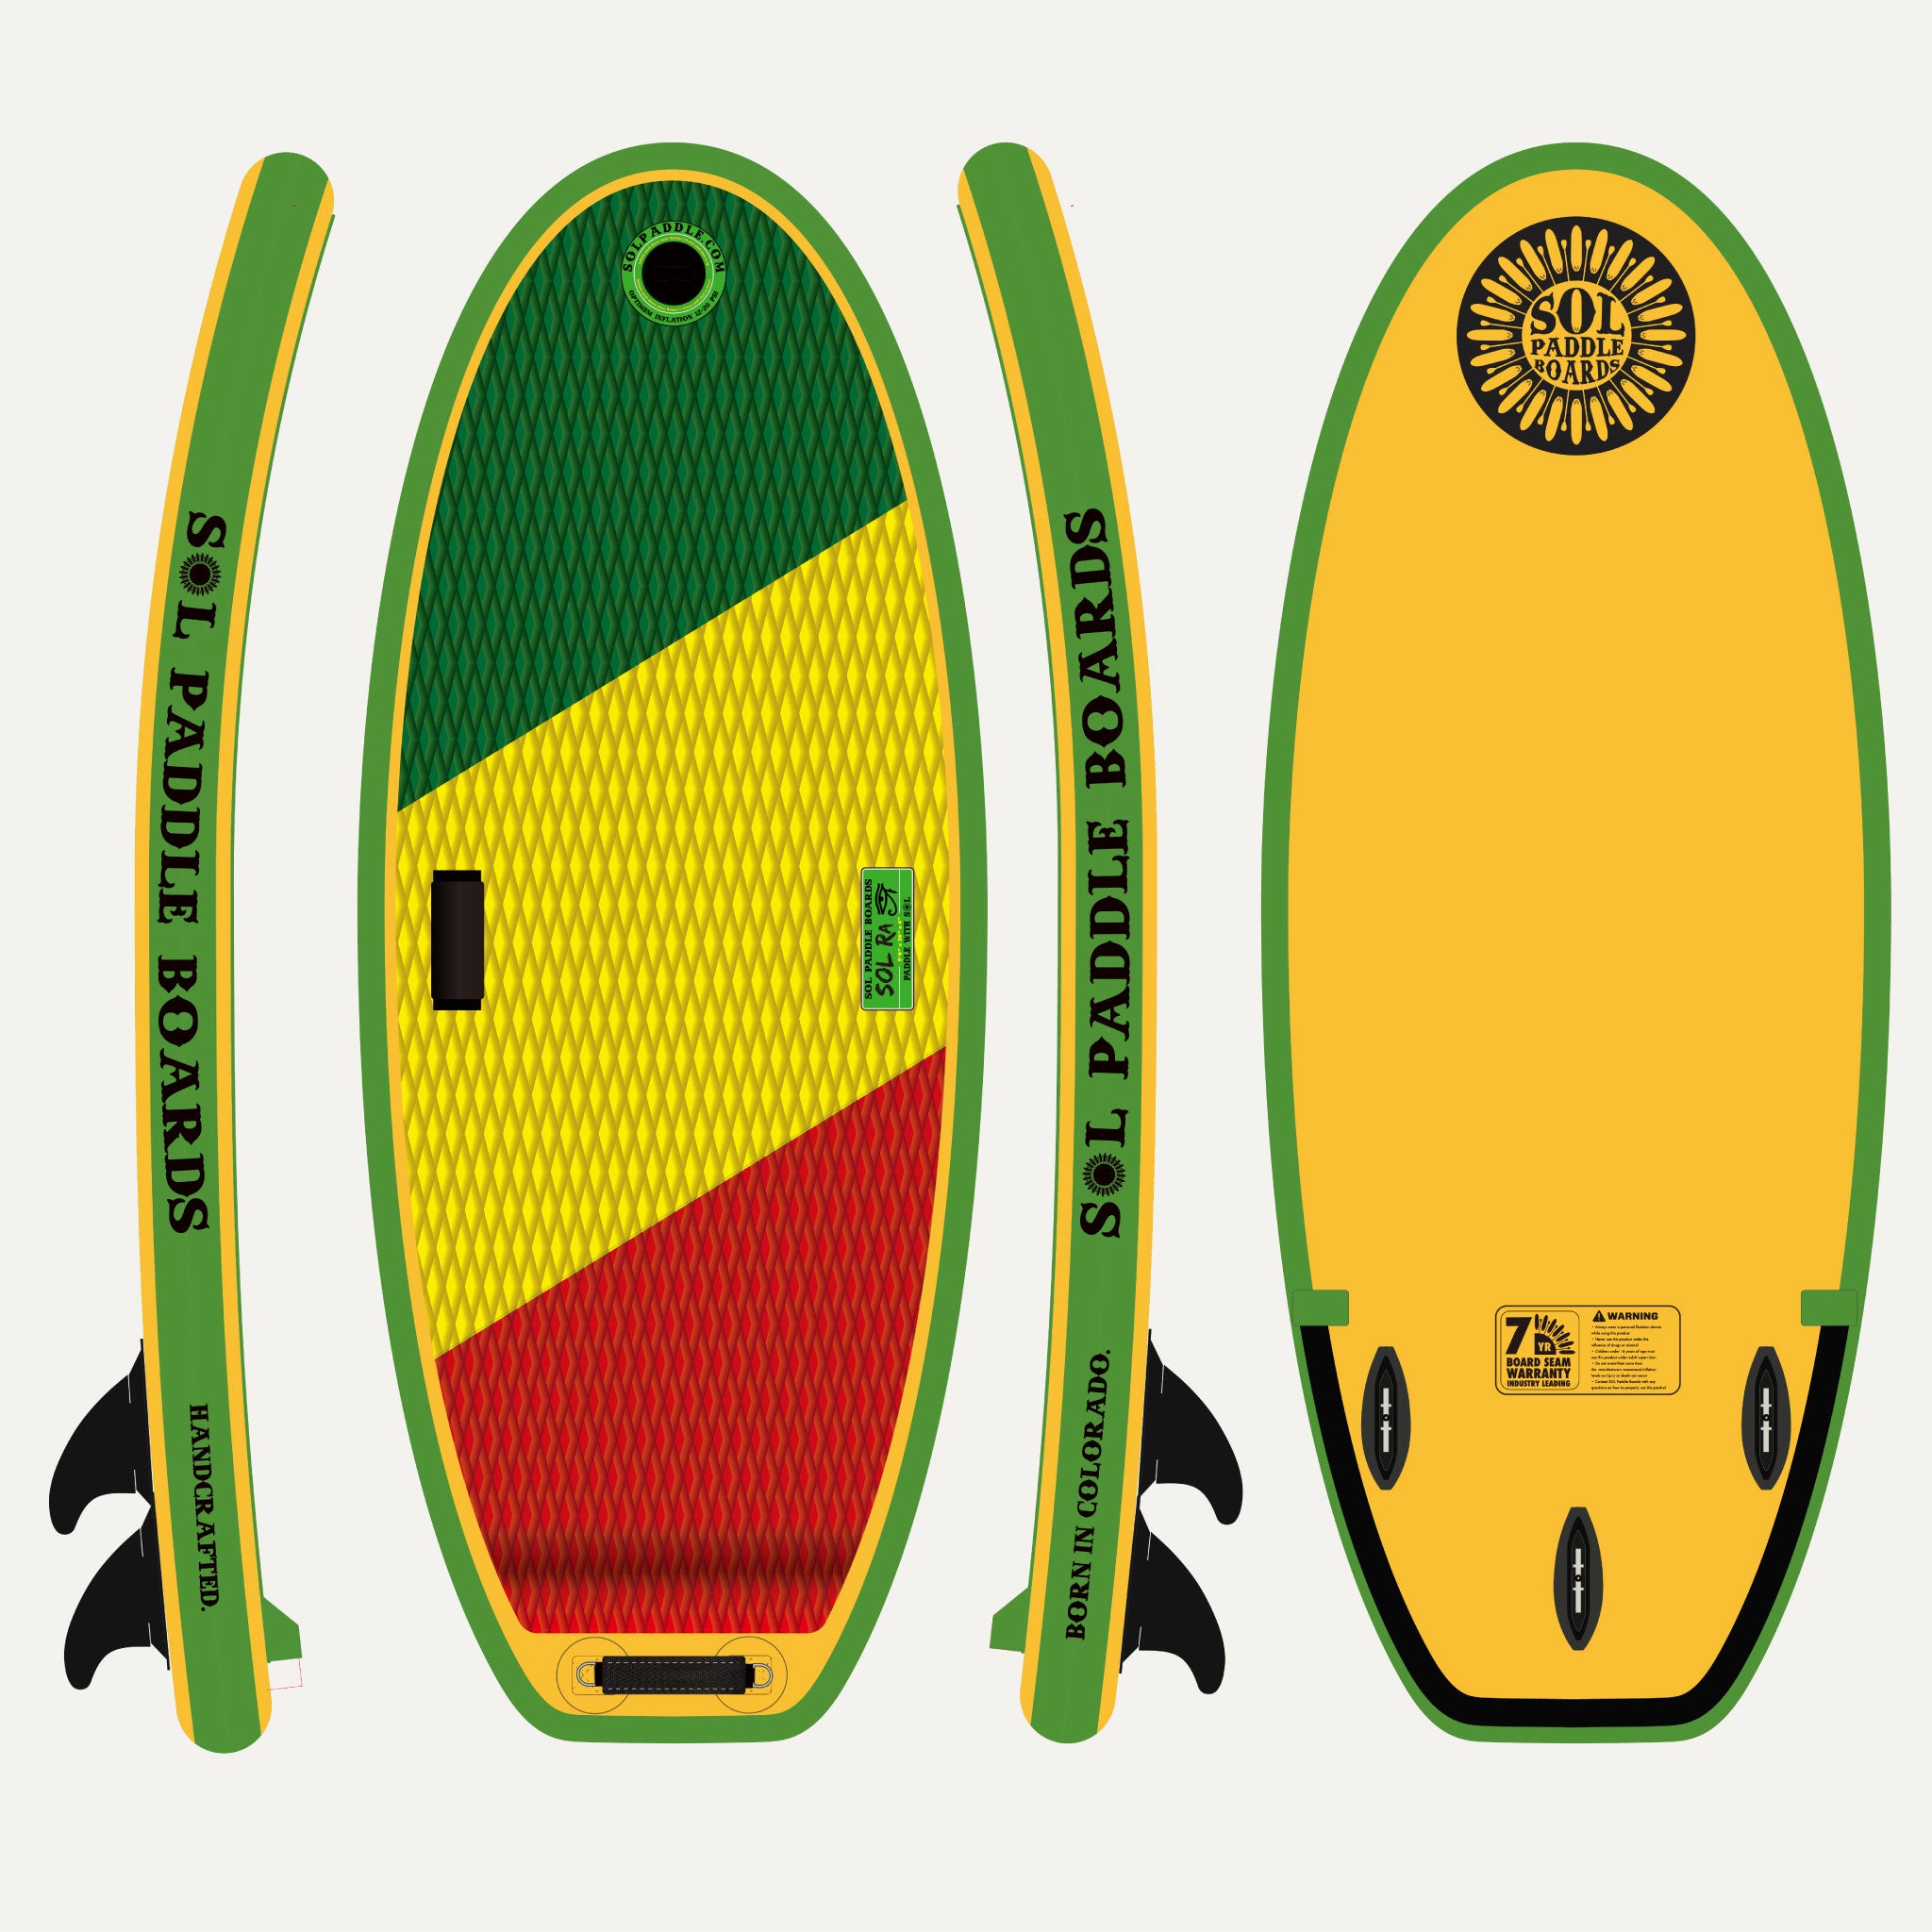 Classic SOLra Inflatable River Surfboard showcasing all four sides of the river surfboard